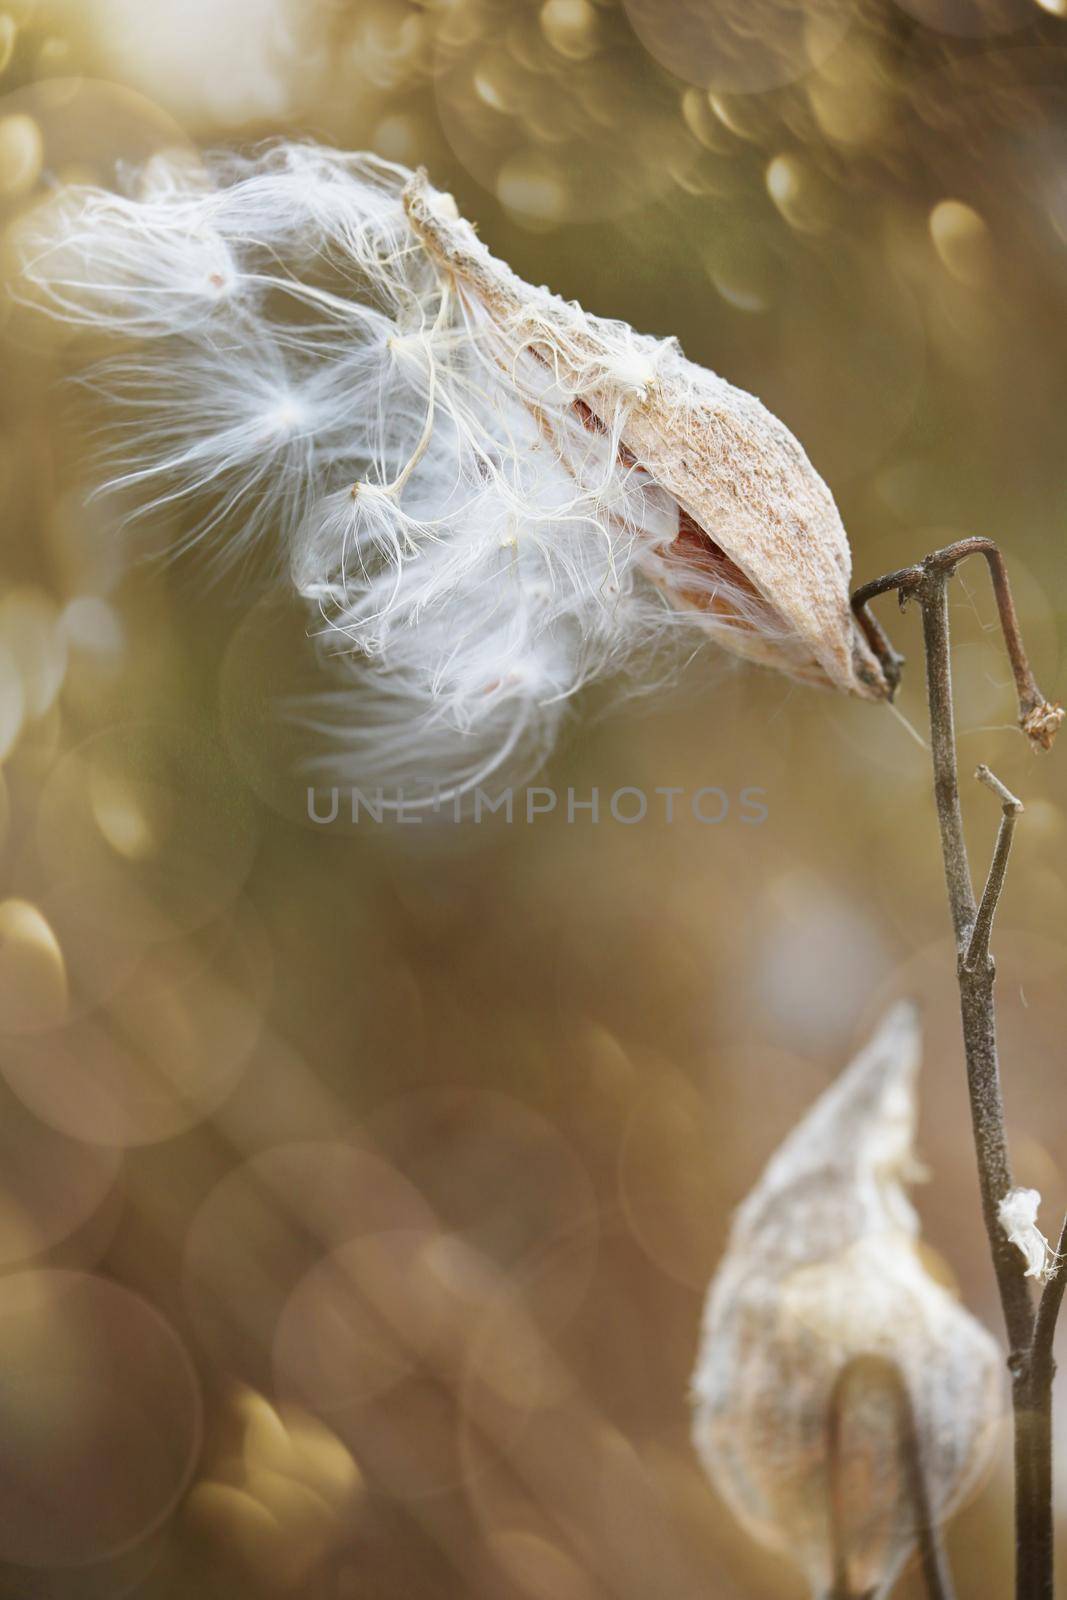 Milkweed pods opening with seeds  blowing in the wind by Sandralise